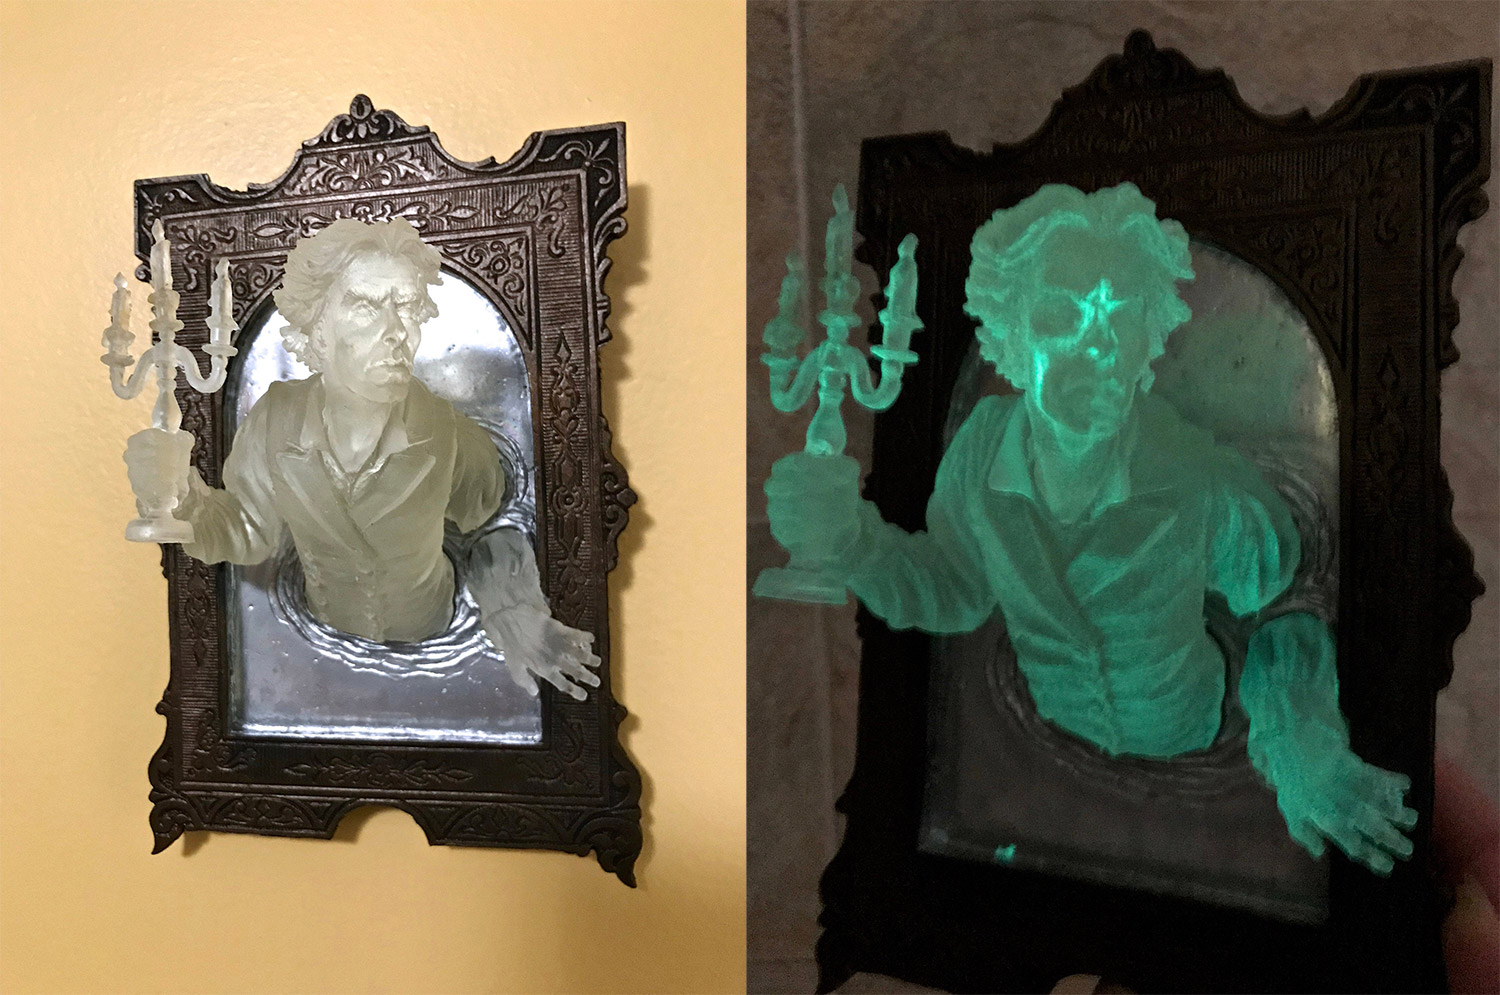 Super Creepy Ghost In The Mirror Wall Plaque That Glows In The Dark - 3D Mirror Ghost Figure Sculpture